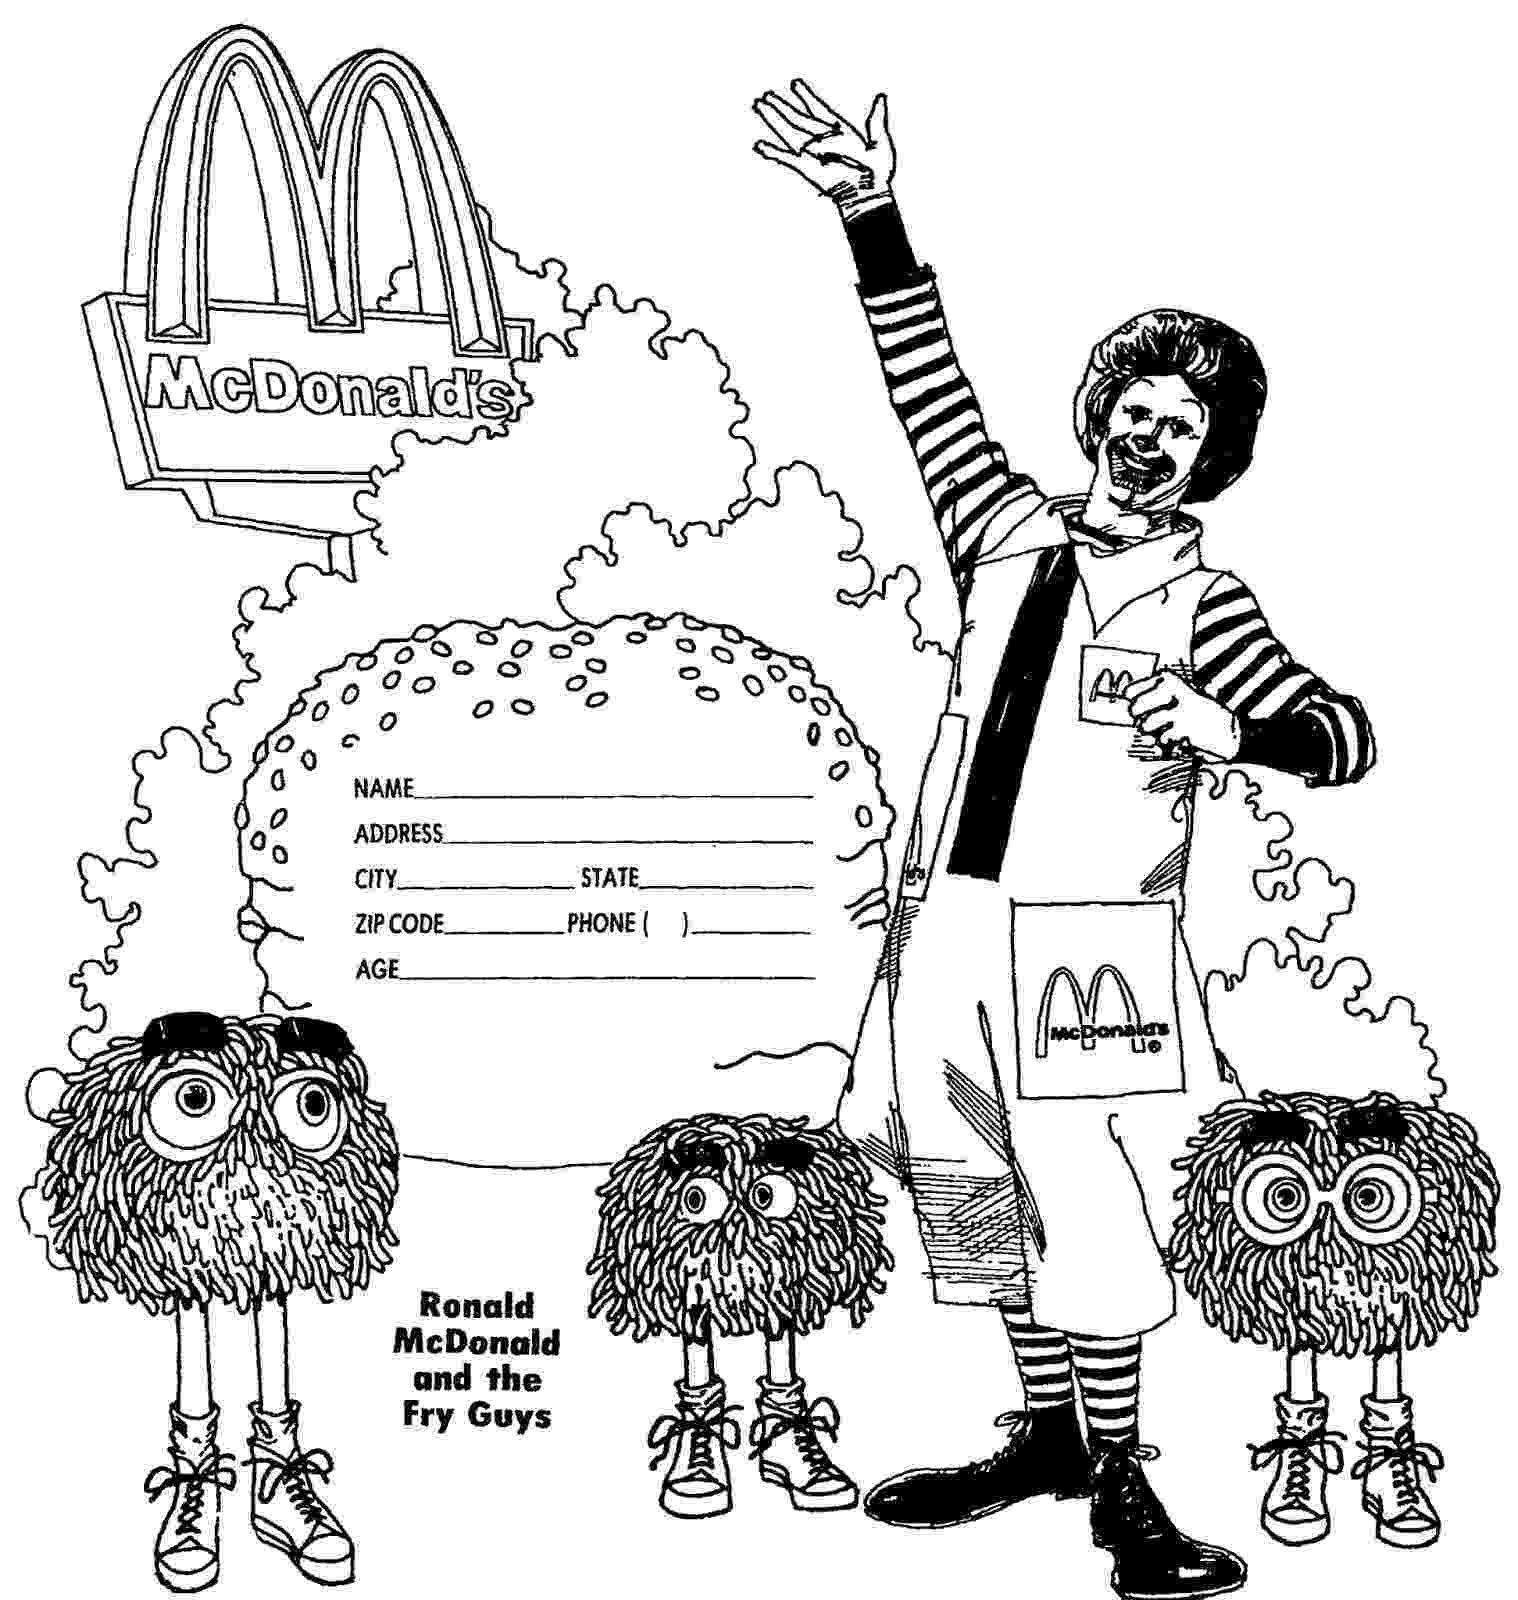 ronald mcdonald colouring pictures mostly paper dolls a ronald mcdonald valentine 1976 colouring ronald pictures mcdonald 